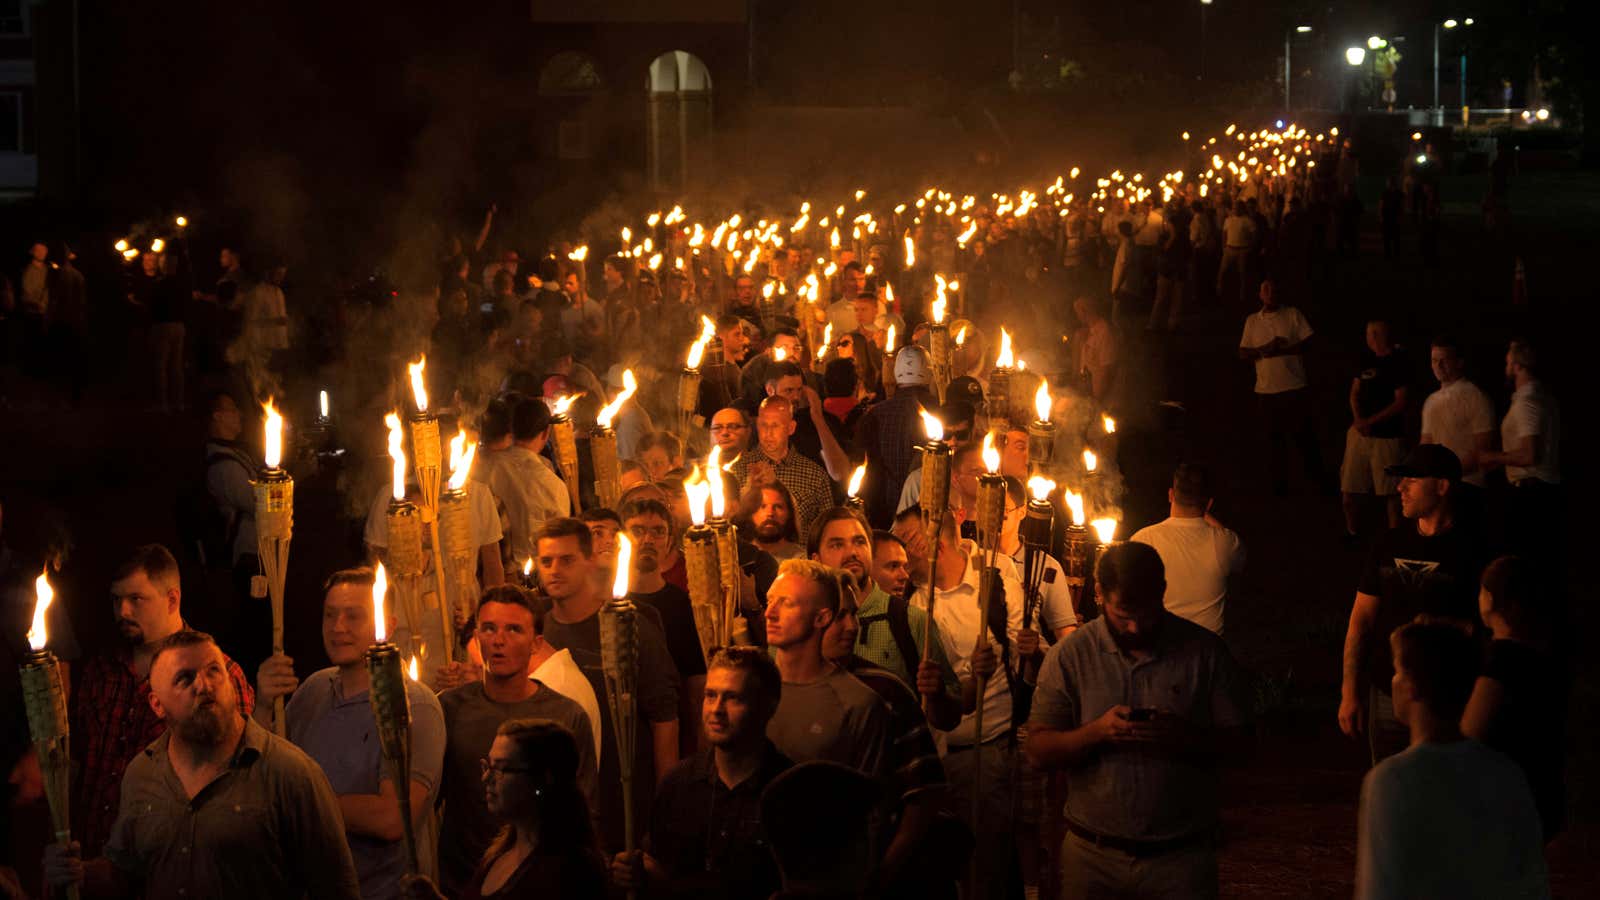 “Unite the Right” protestors on August 11 at the University of Virginia.